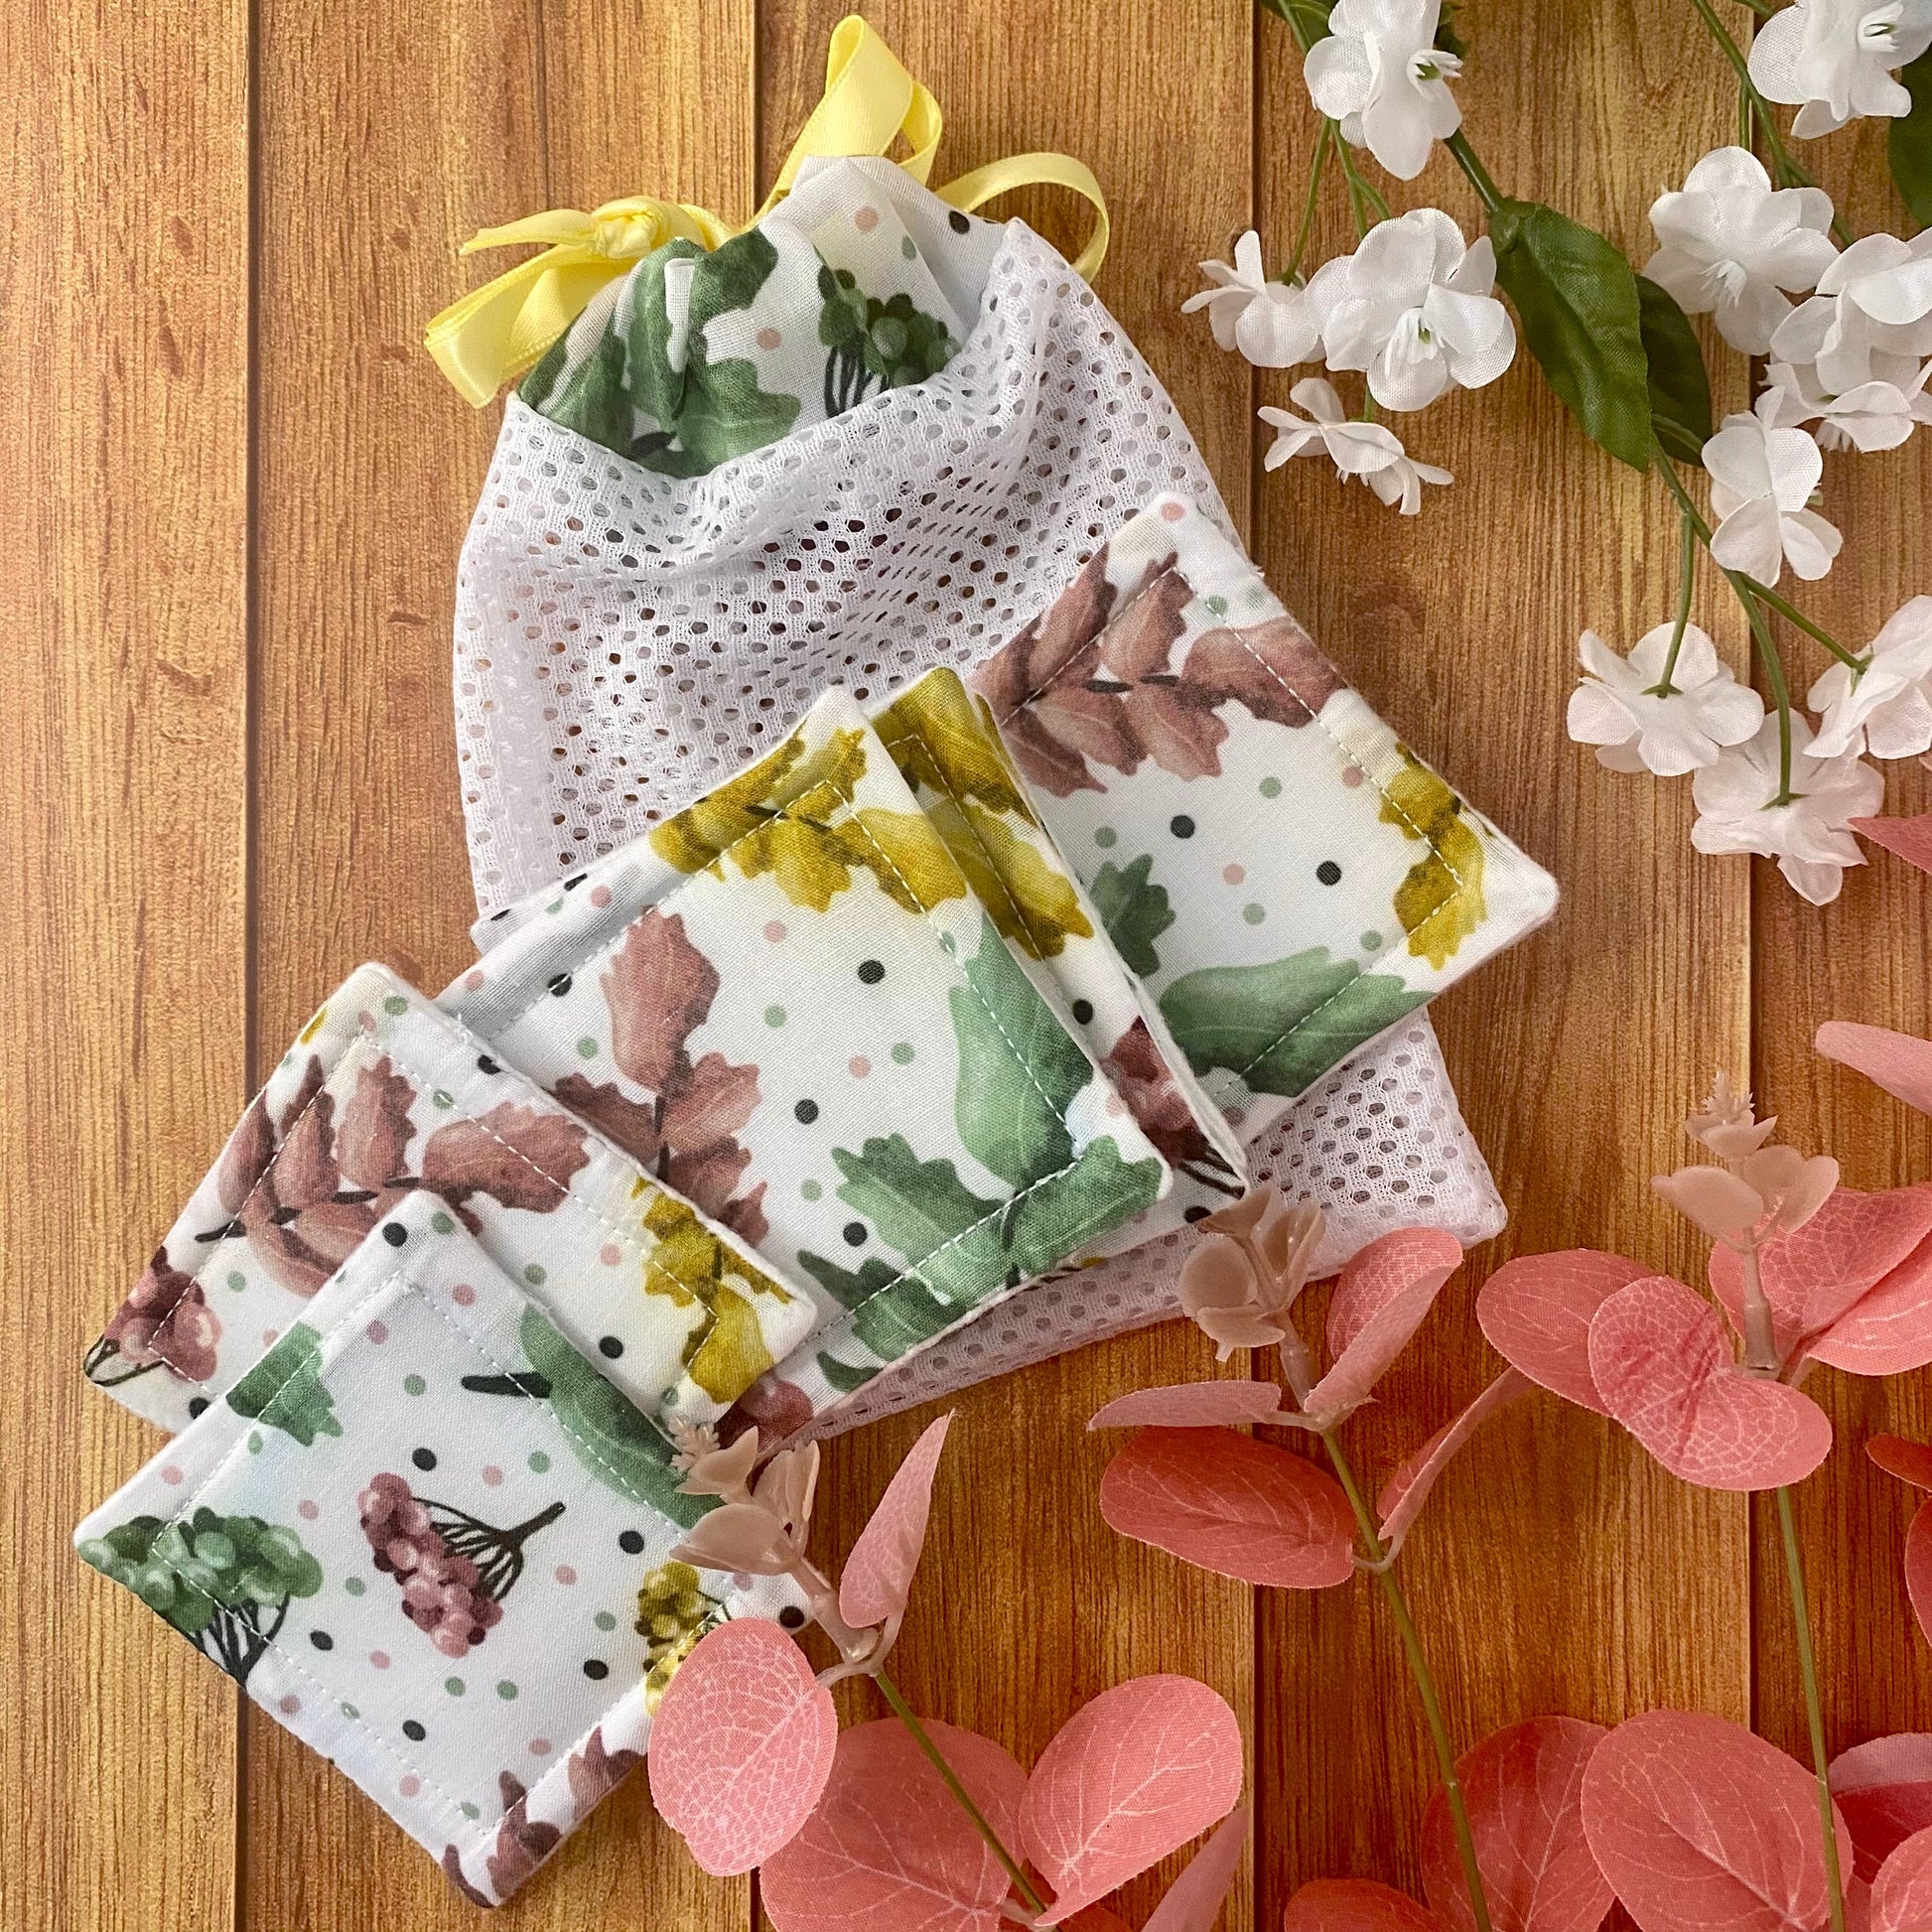 pretty foliage patterned reusable skincare pads and washbag on wooden background